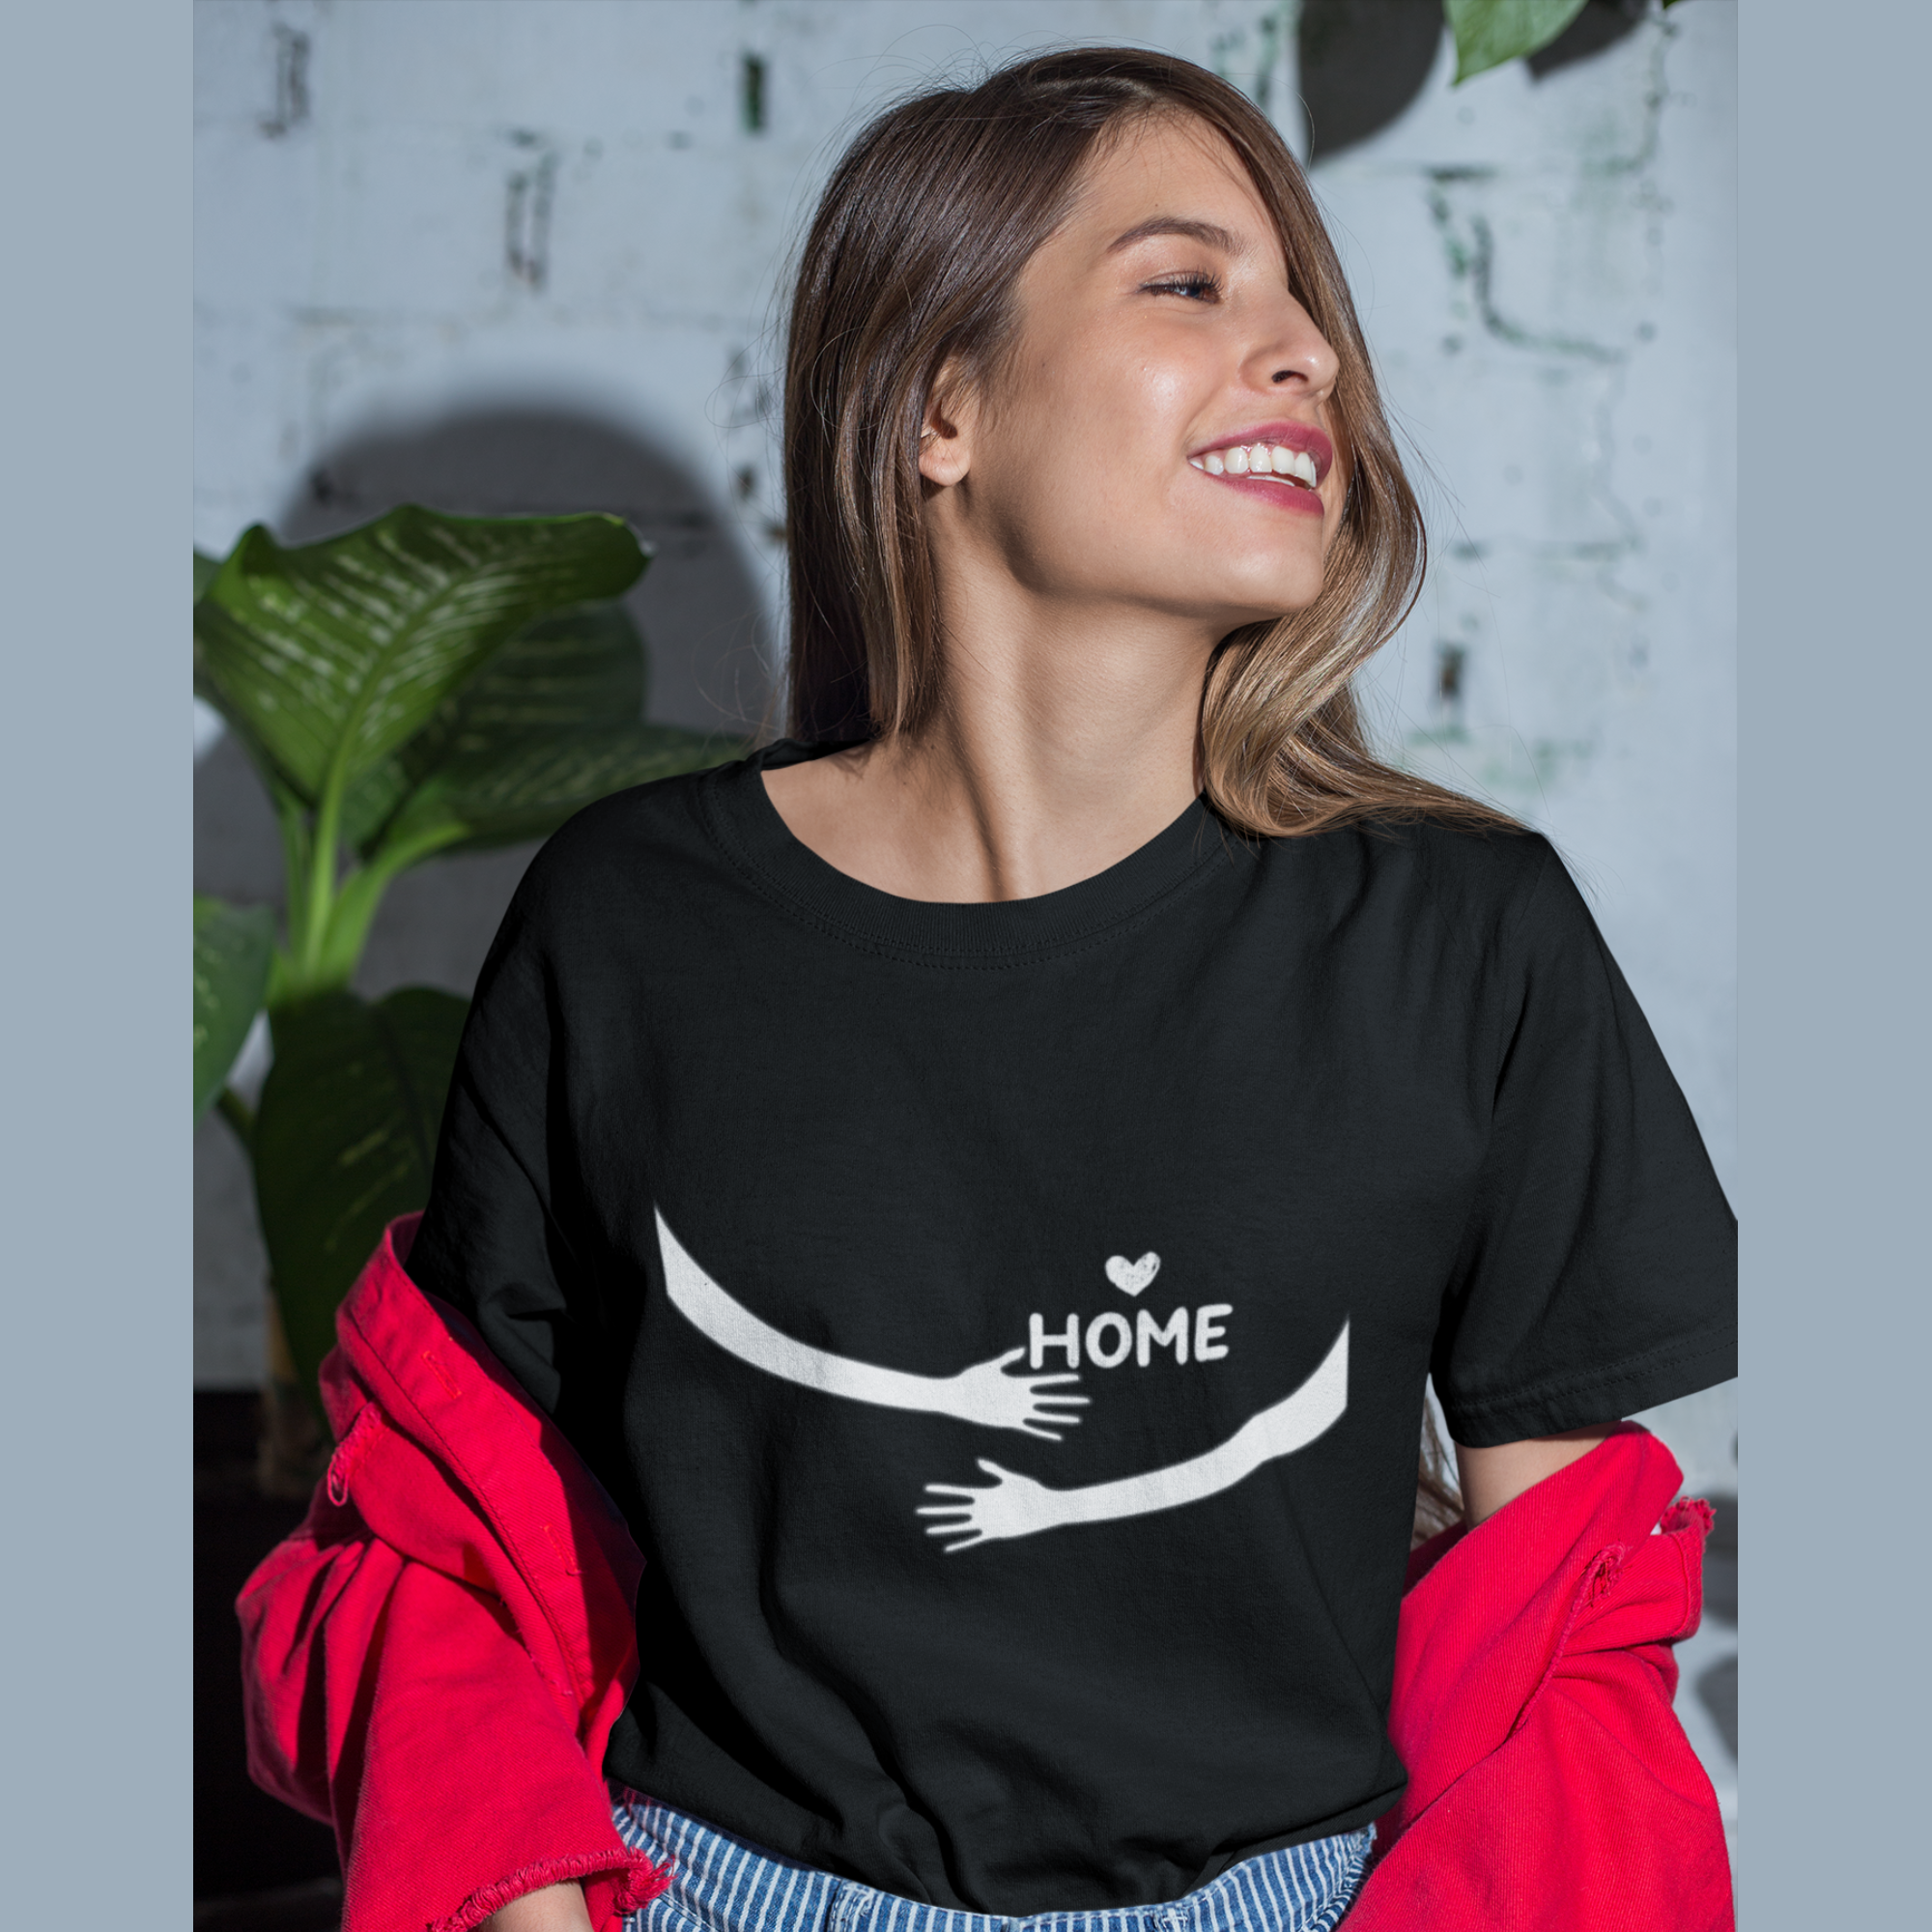 My home: Your arms | Premium Unisex Half Sleeve T-shirt